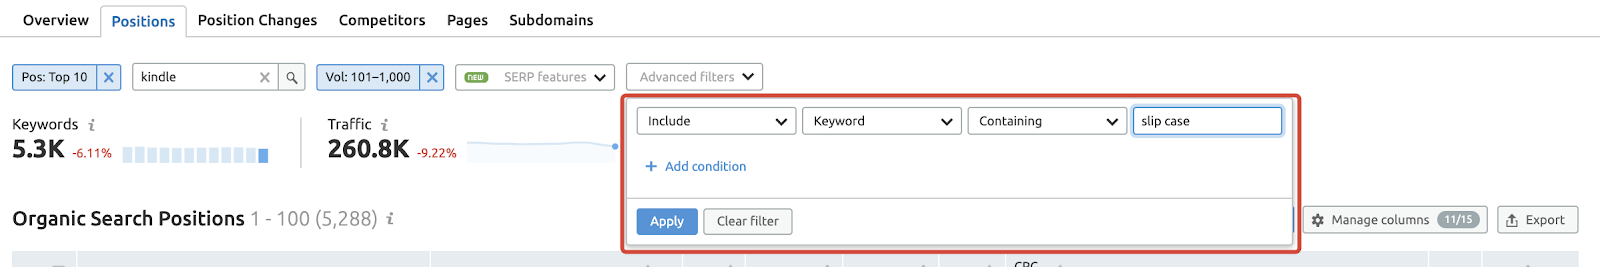 Finding ranges of keyword difficulty and volume